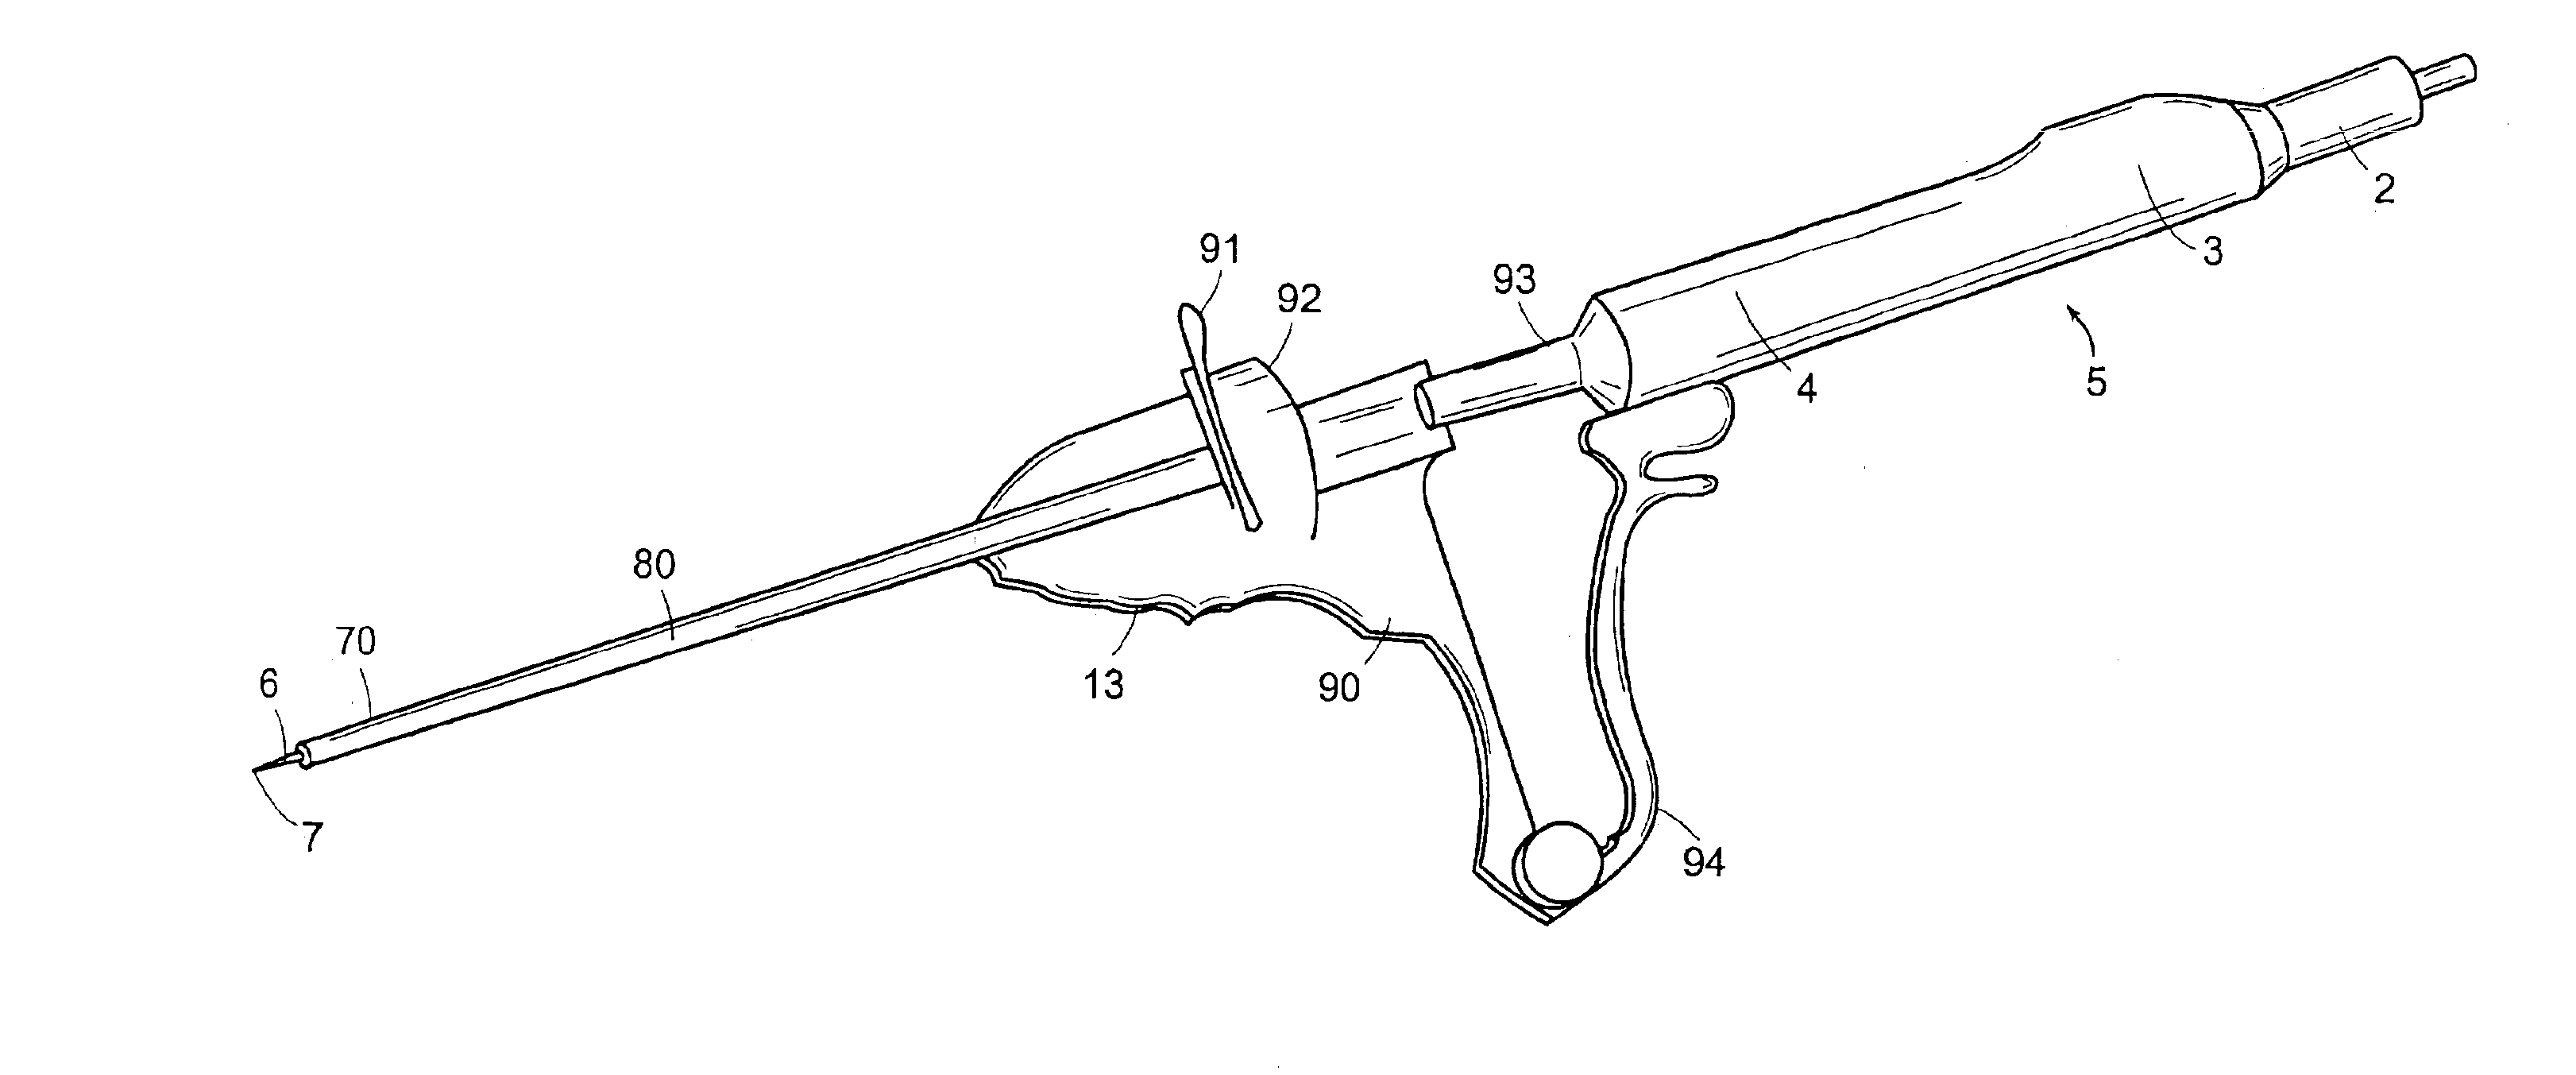 Apparatus for removing plaque from blood vessels using ultrasonic energy